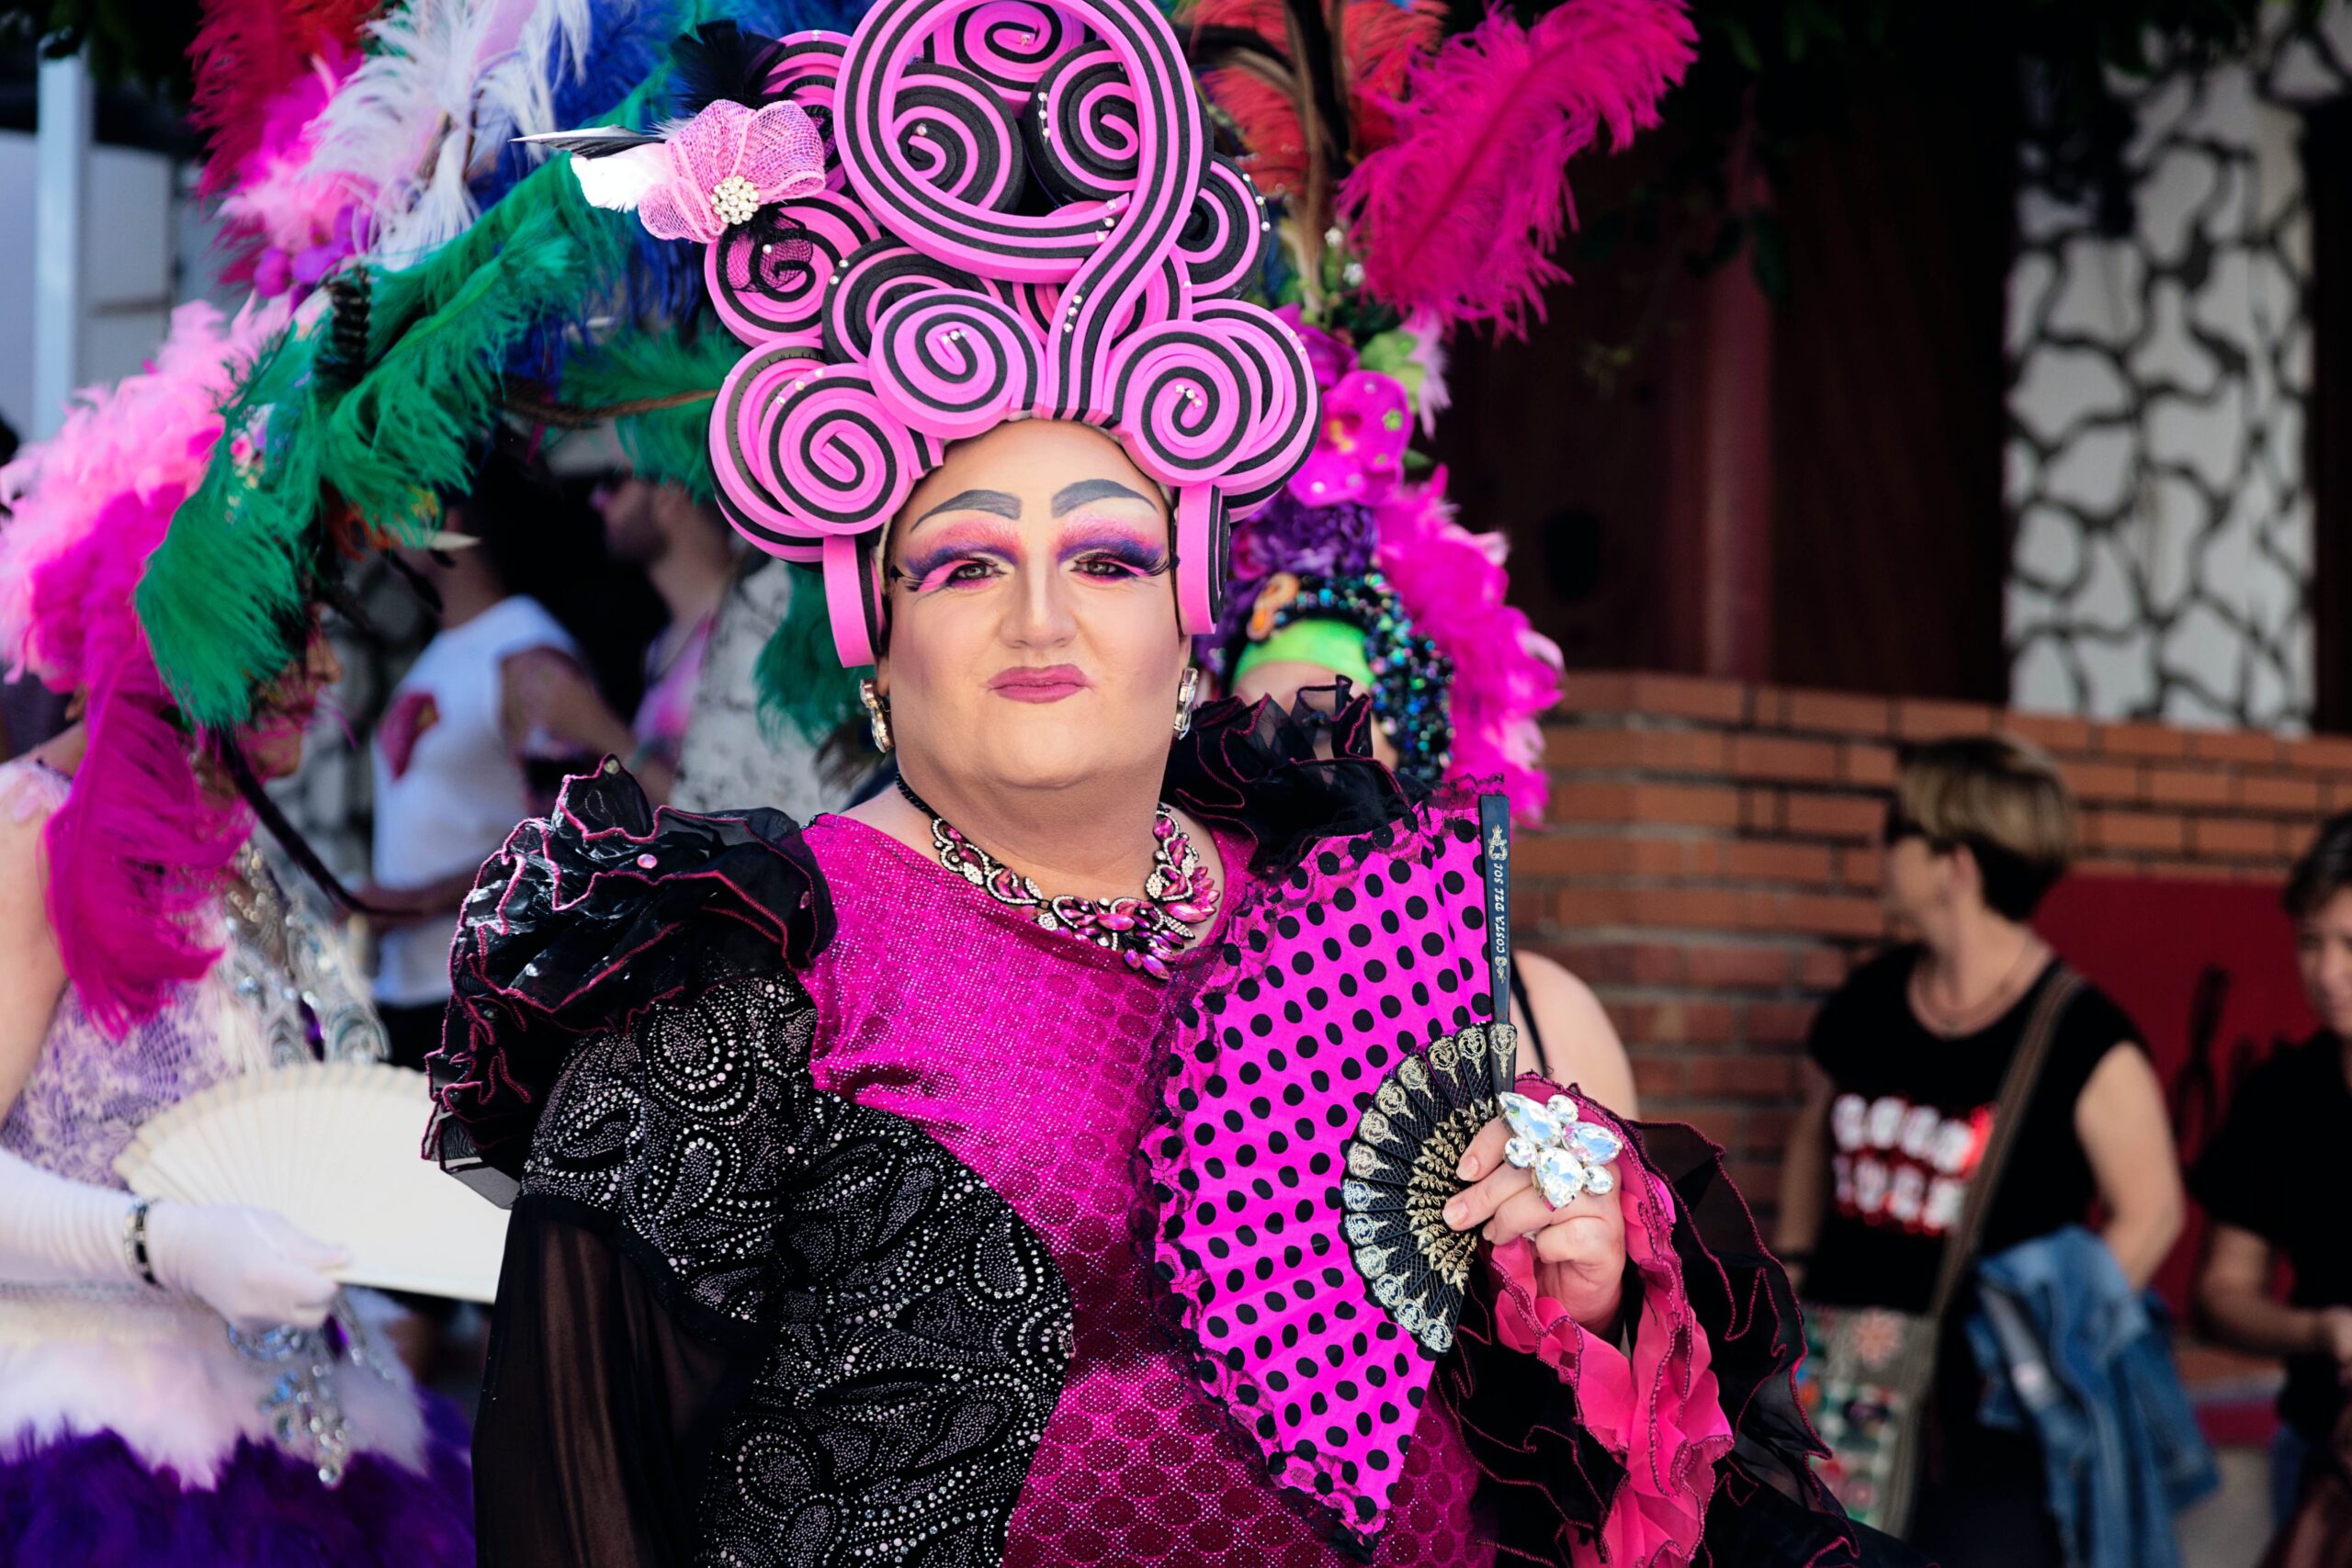 Drag queen at Pride, dressed in an elaborate pink outfit